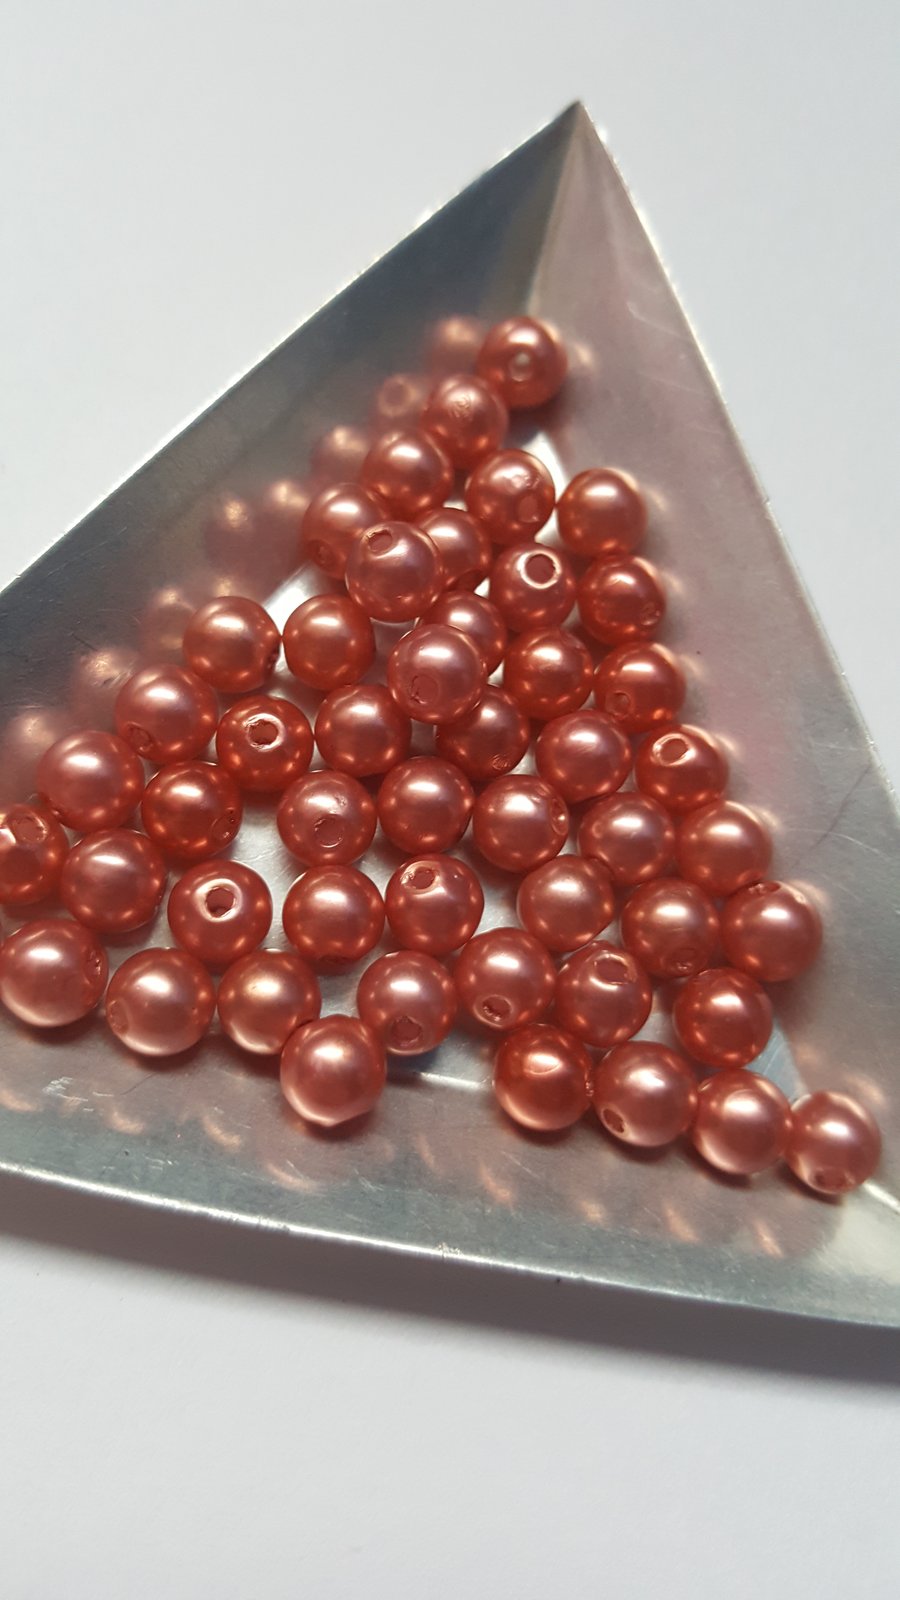 50 x Acrylic Pearl Beads - Round - 6mm - Cappuccino Mix 